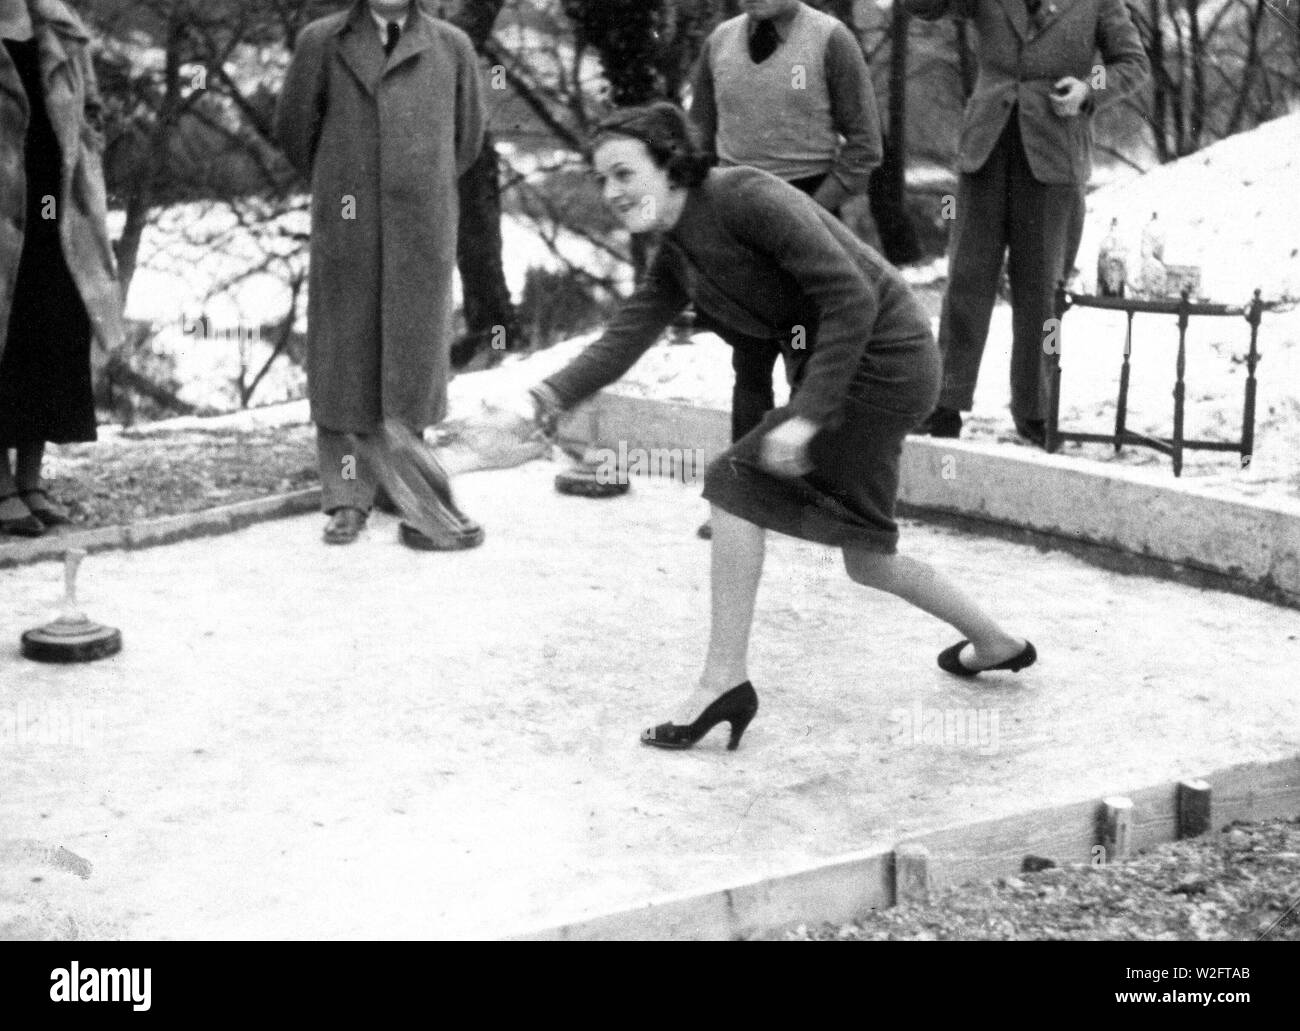 Eva Braun Collection (Album 2) - Woman playing some type of curling game outdoors ca. 1930s Stock Photo